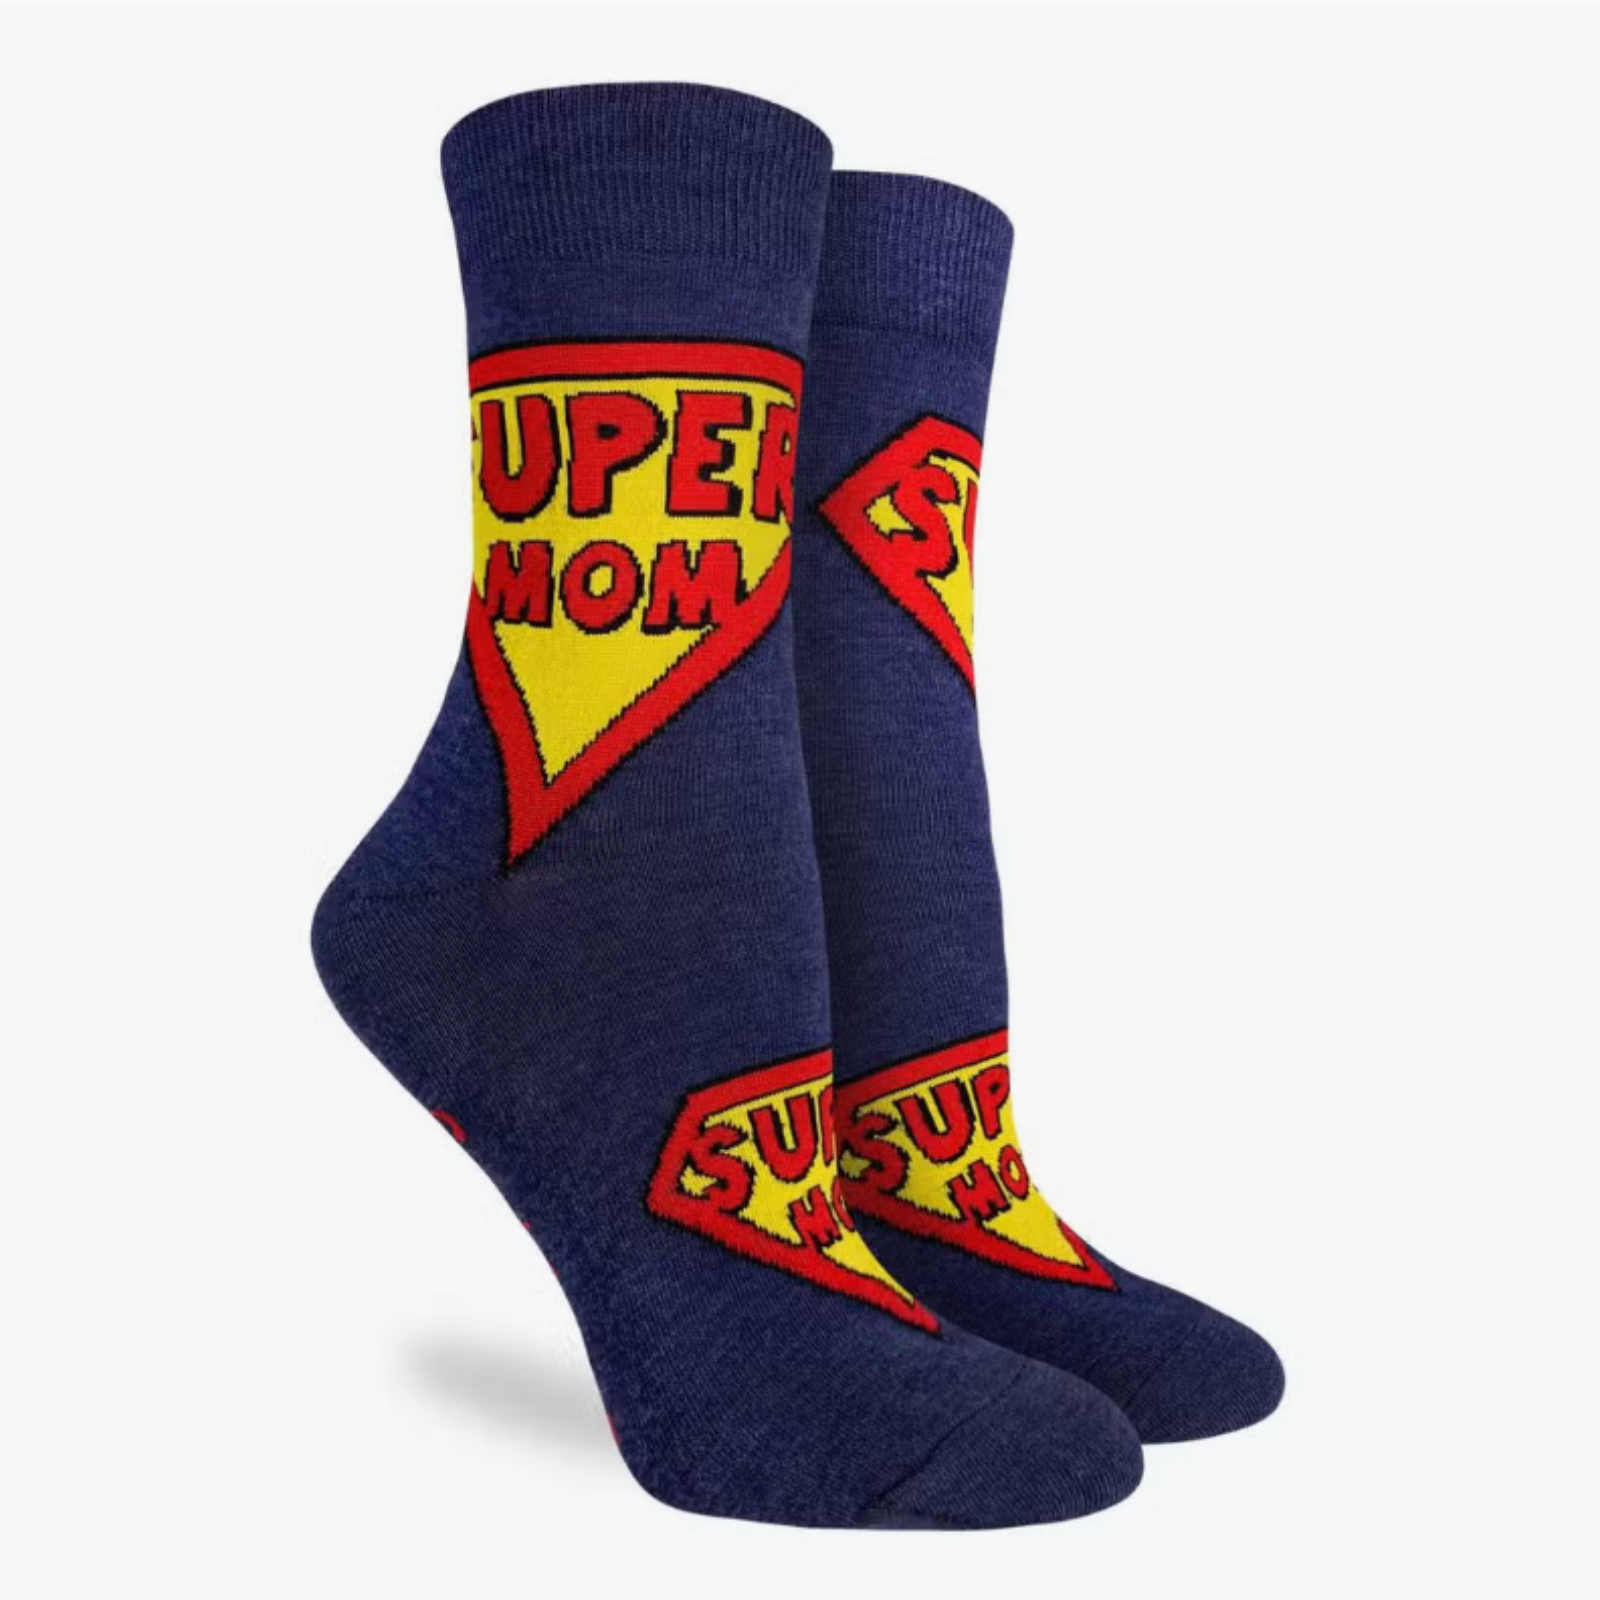 Good Luck Sock Super Mom women's crew sock featuring navy blue sock with "Super Mom" in red with yellow background on ankle and top of foot. Sock shown on display feet. 